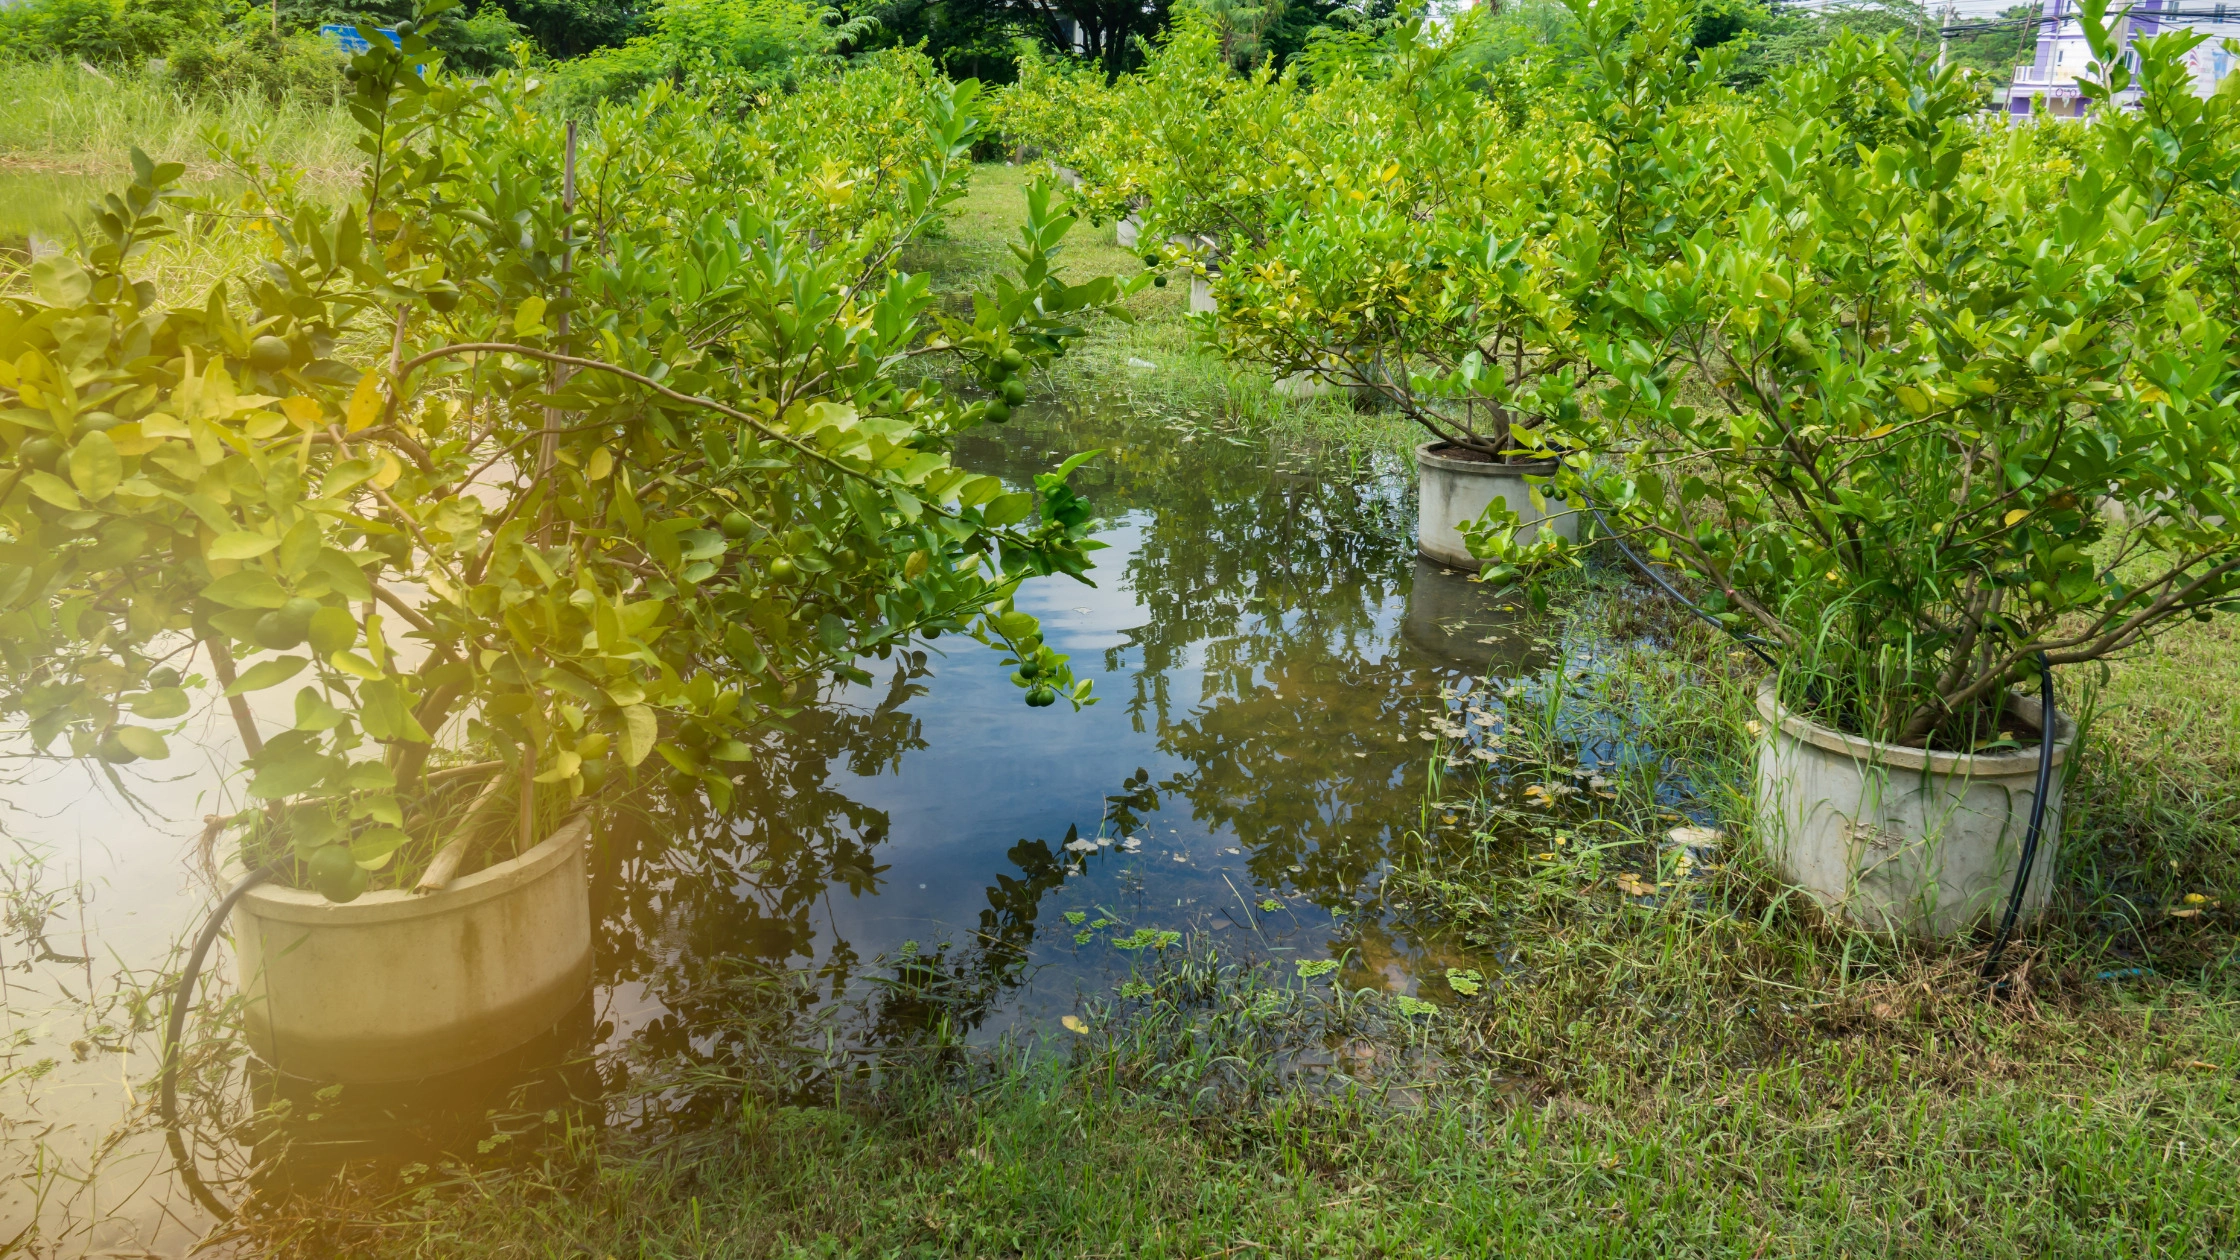 A flooded garden showing plants in pot surrounded by deep water.